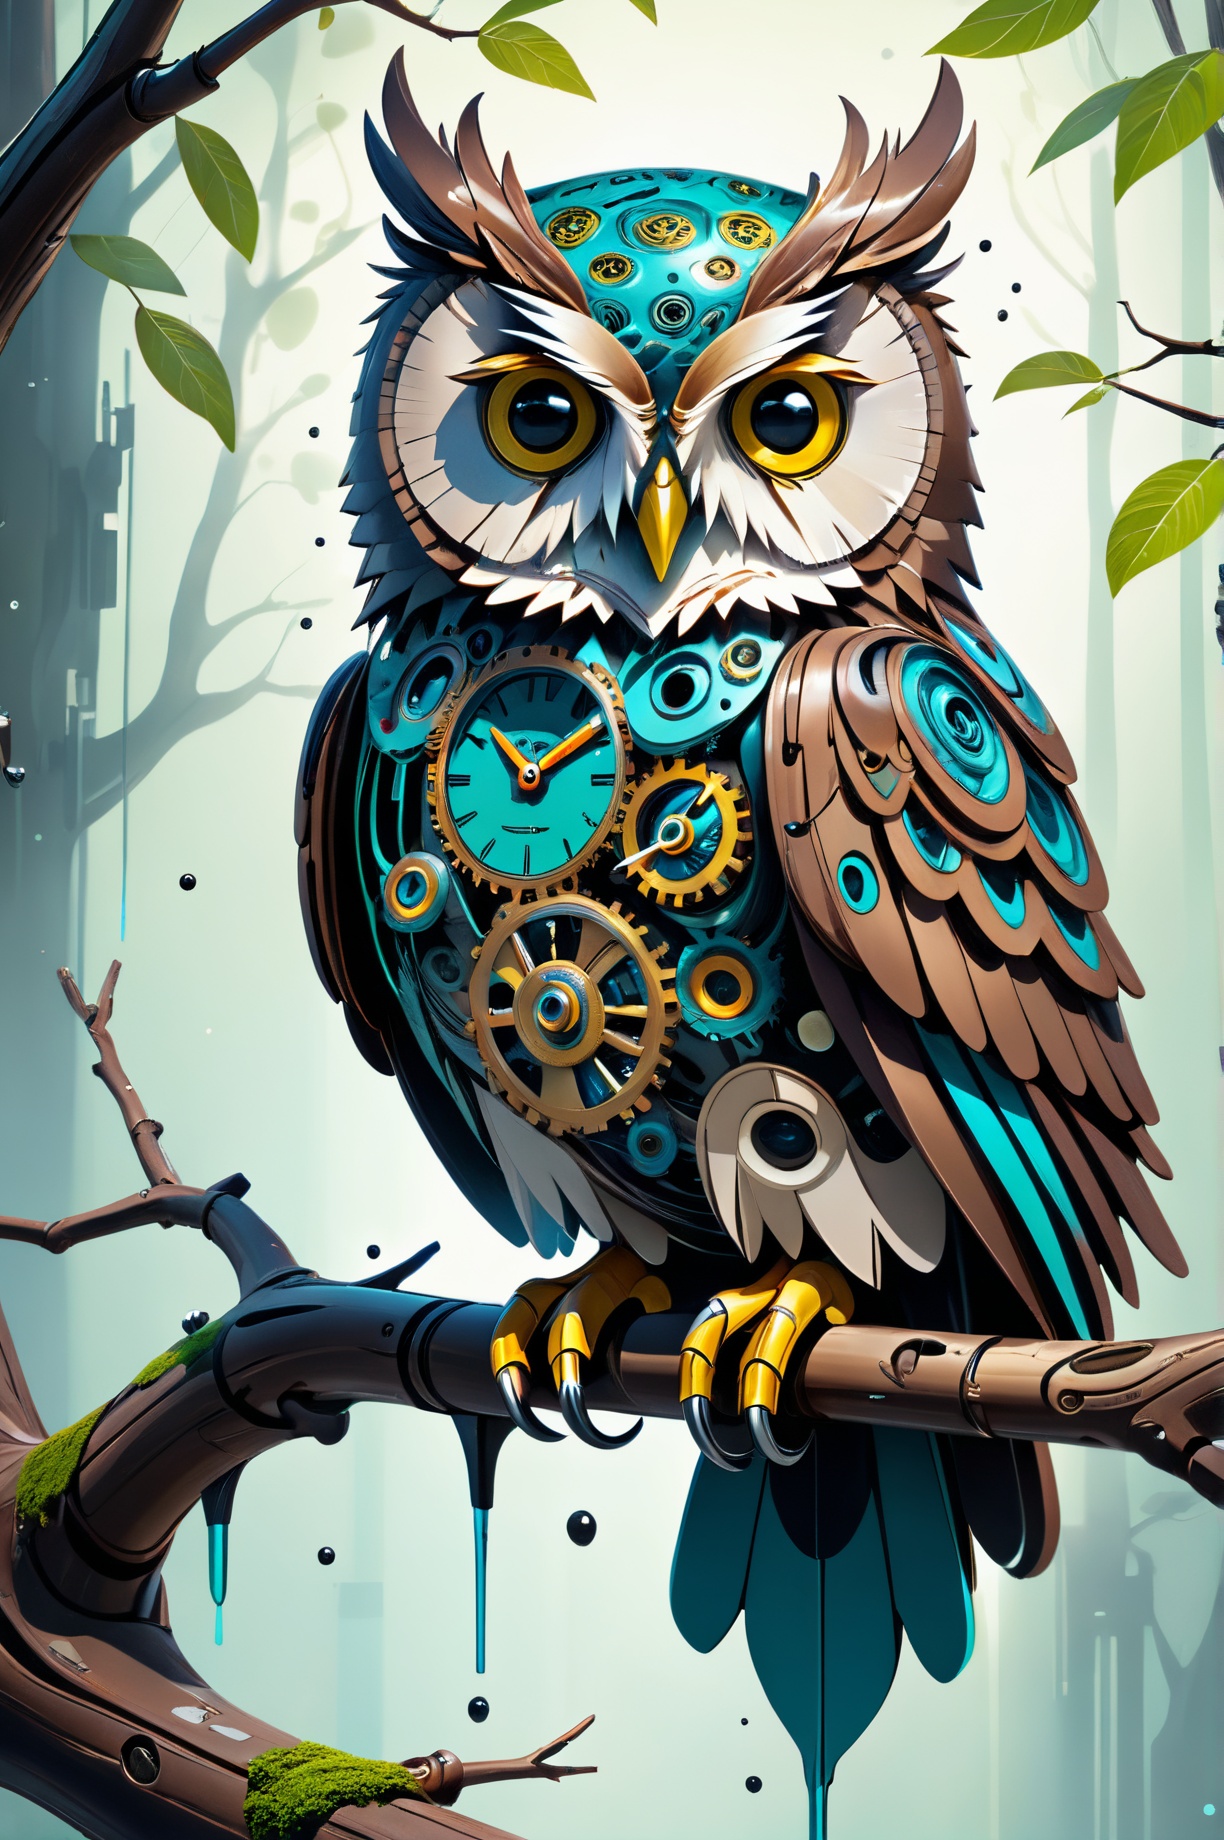 futuristic-biomechanical cyberpunk, ultradetailed owl **** out of clocks and gears in sitting on a tree branch, intricate and hyperdetailed fluid acryl and oil splash